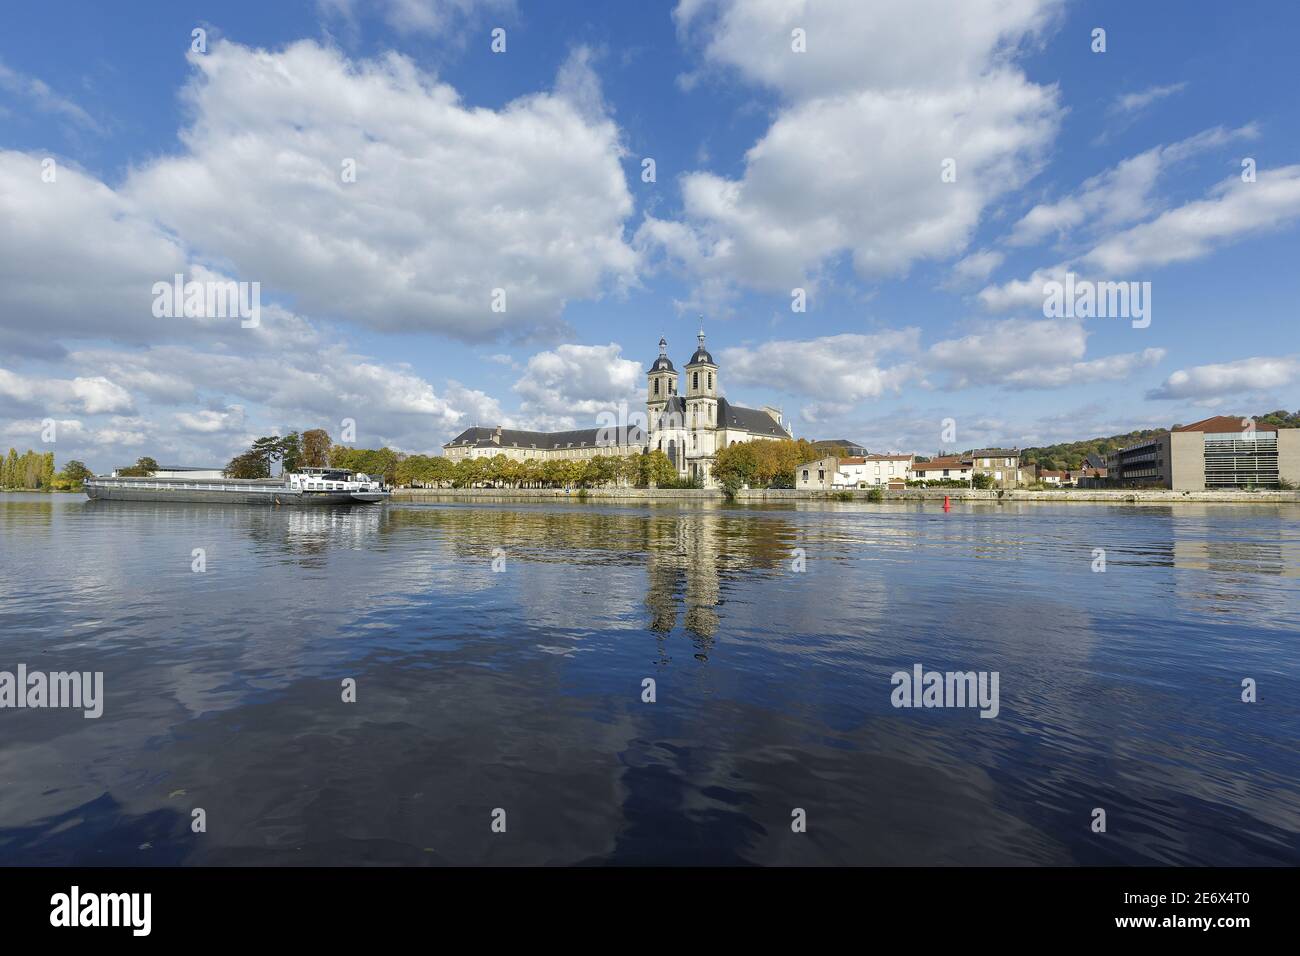 France, Meurthe et Moselle, Pont ? Mousson, Premontres abbey church today Lorraine cultural center built in the 19th century on the riverbanks of the Moselle Stock Photo